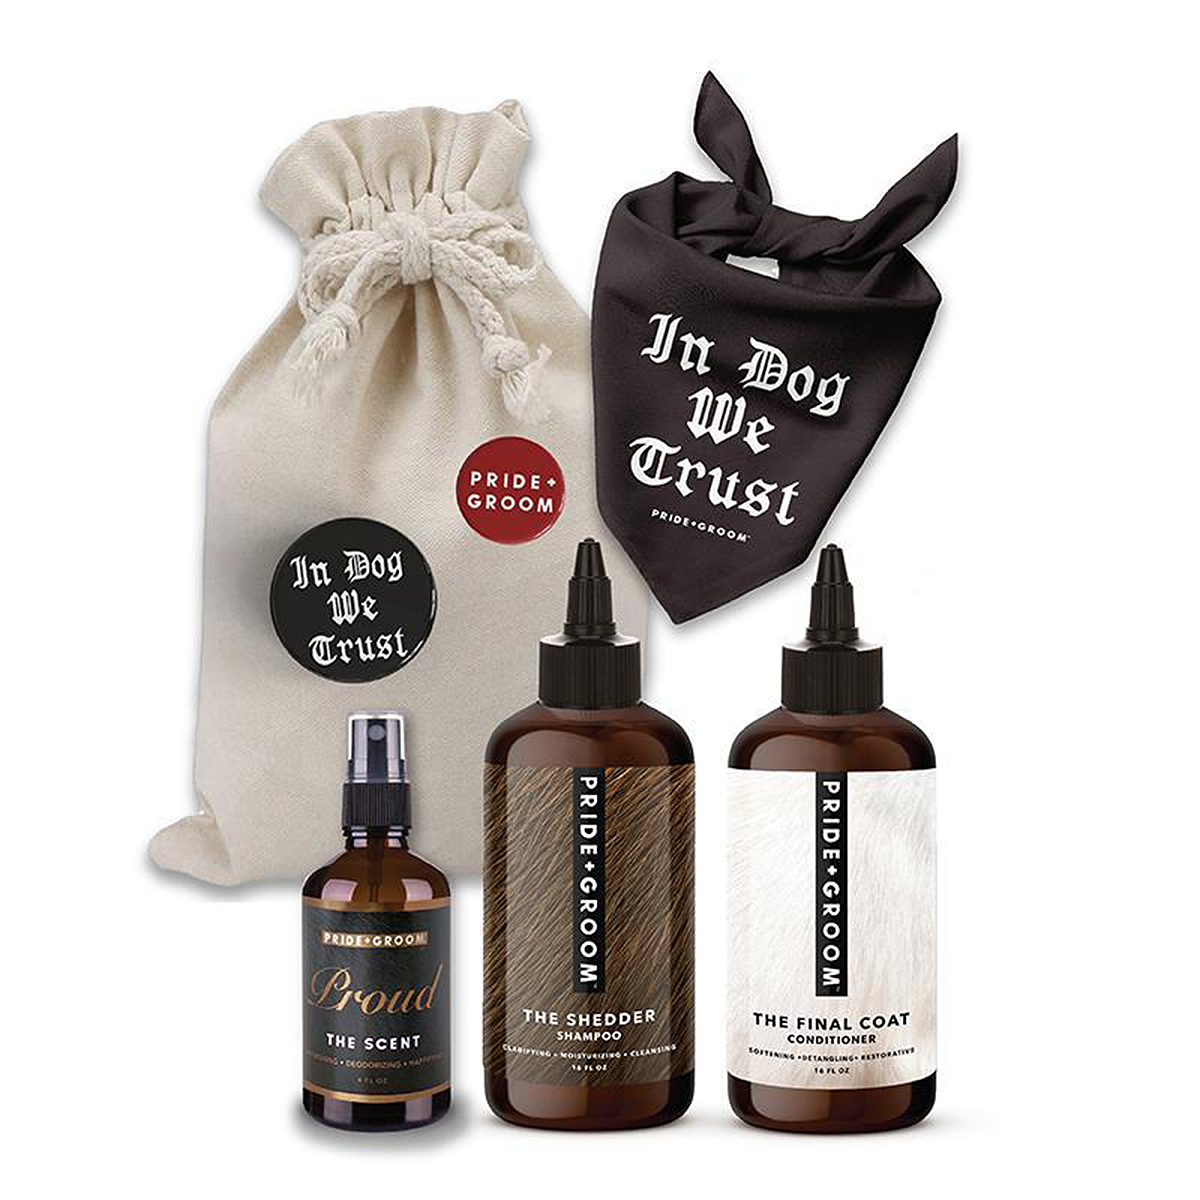 https://www.usmagazine.com/wp-content/uploads/2021/10/holiday-gifts-pet-lovers-pride-groom-set.jpg?quality=78&strip=all